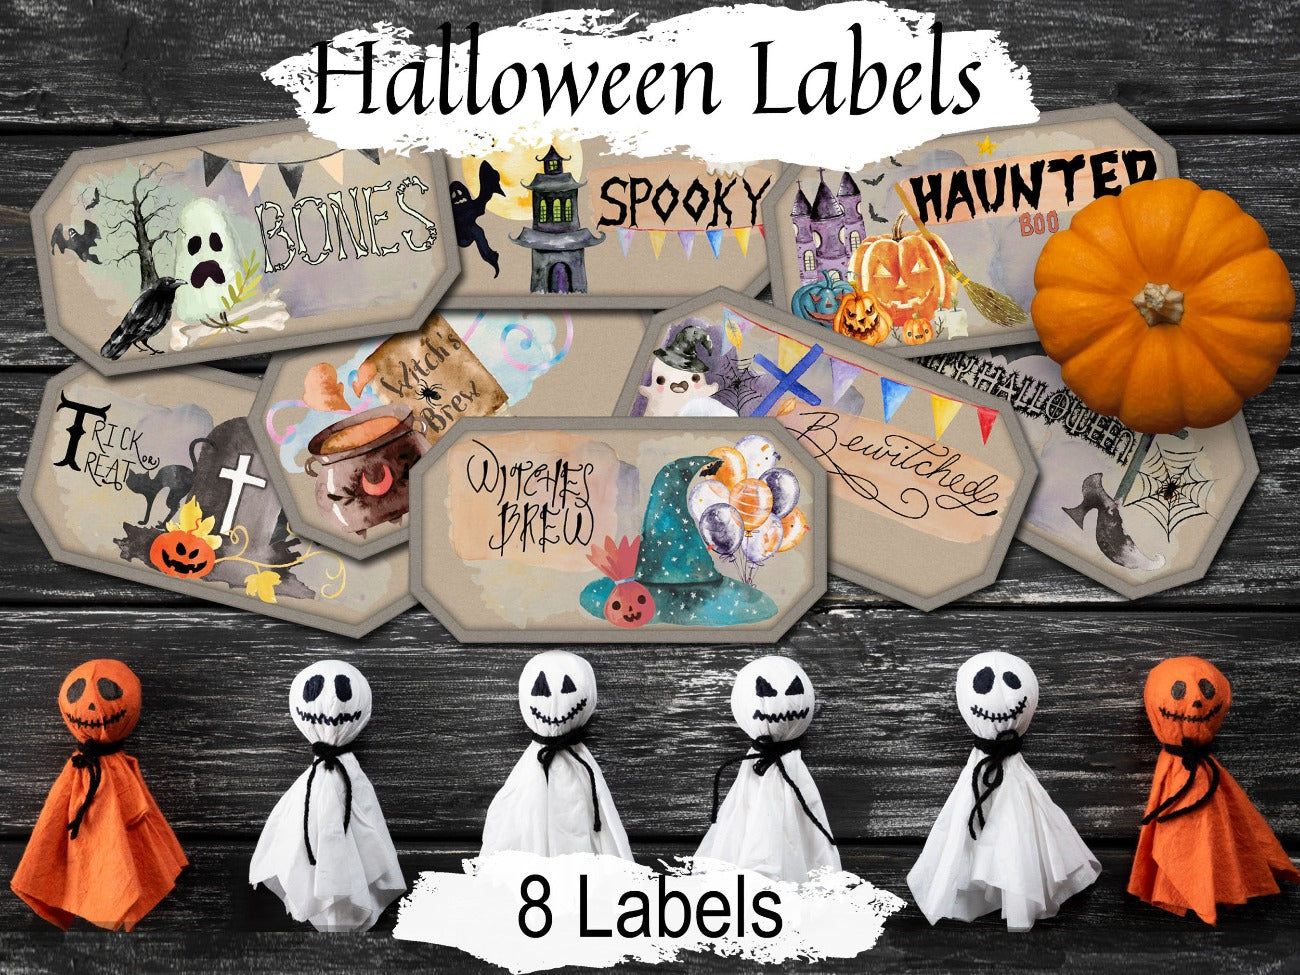 HALLOWEEN LABELS, Spooky Potion Labels, Haunted Black Cat Trick or Treat Tags, Whimsical Party Printables, 8 Printable Haunted Labels- Morgana Magick Spell